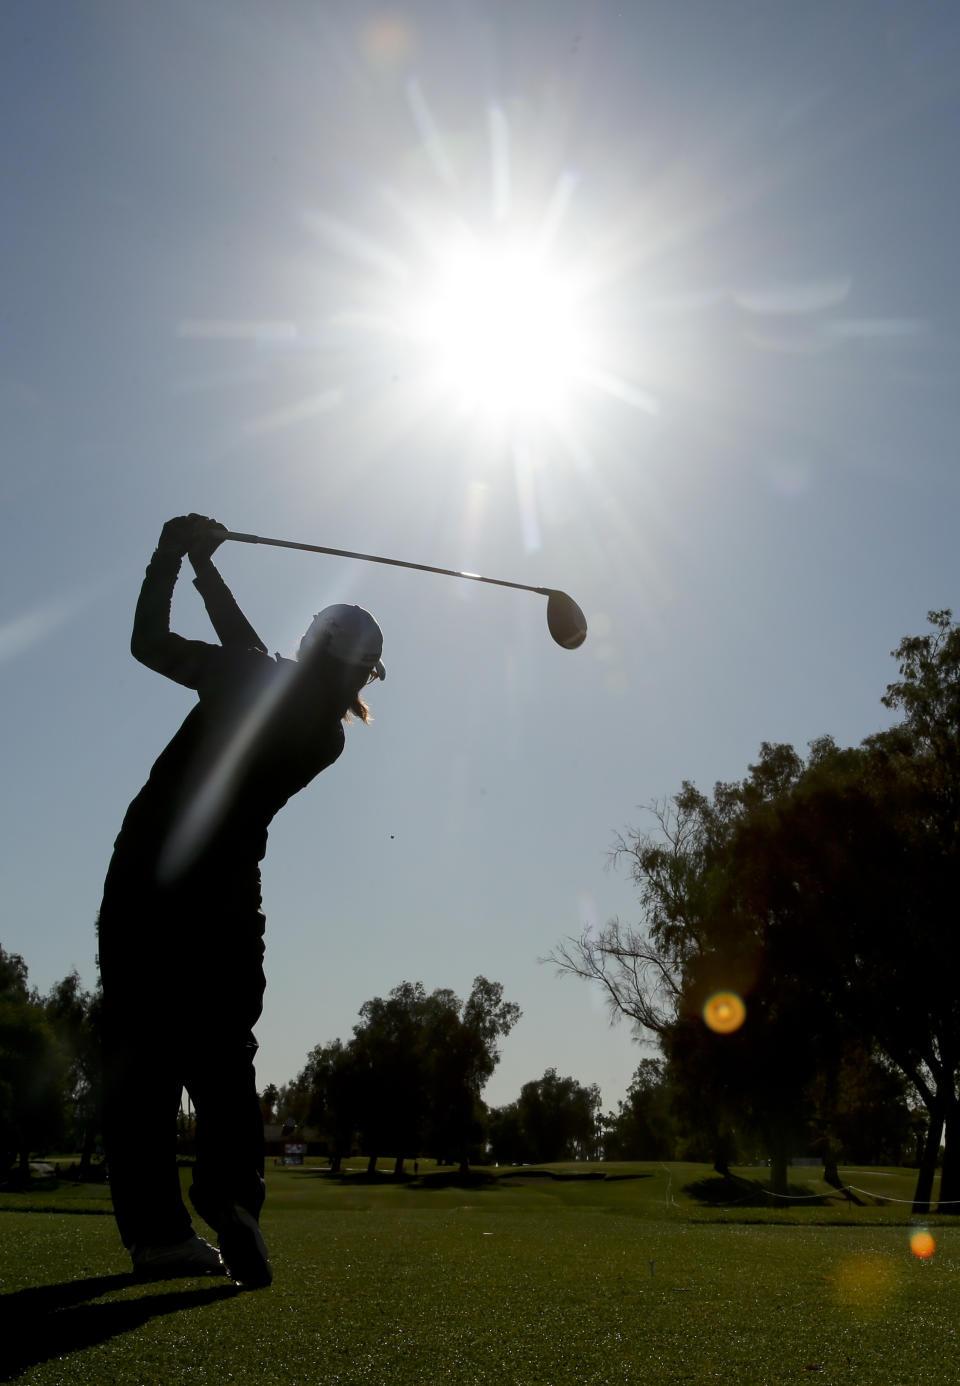 Lydia Ko, of New Zealand, watches her tee shot on the 12th hole during the first round at the LPGA Kraft Nabisco Championship golf tournament Thursday, April 3, 2014 in Rancho Mirage, Calif. (AP Photo/Chris Carlson)